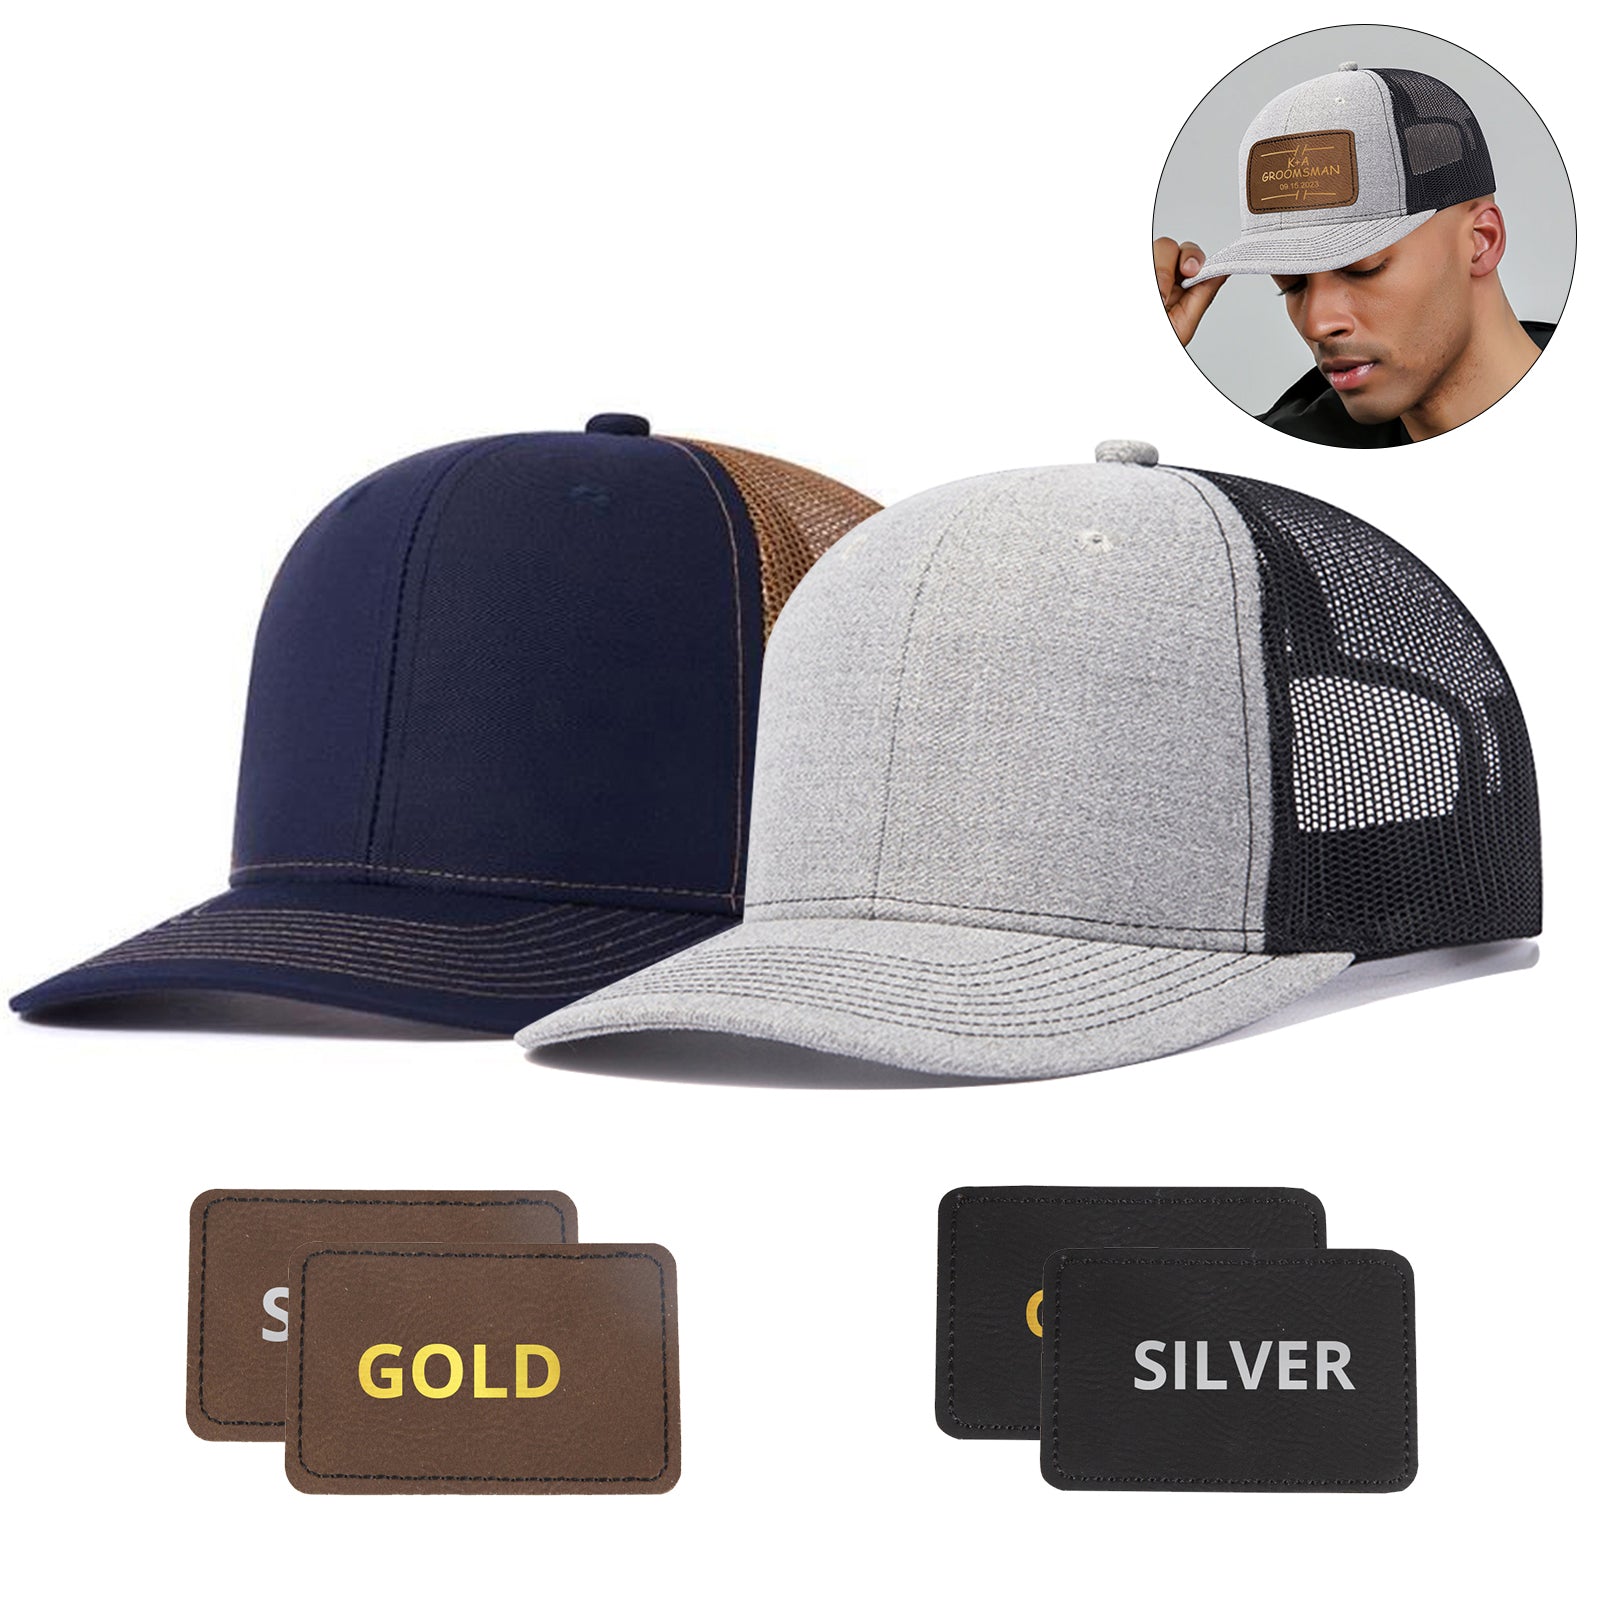 Two CrealityFalcon 2 pcs Adjustable Men Mesh Trucker Hats with 4pcs Self-adhesive Cap Stickers for Laser Engraving are displayed. One hat is navy blue with brown mesh, and the other is light gray with black mesh. Below are leather patches labeled "GOLD" and "SILVER," masterfully crafted using laser techniques. An inset shows a person wearing the gray hat with a brown patch.